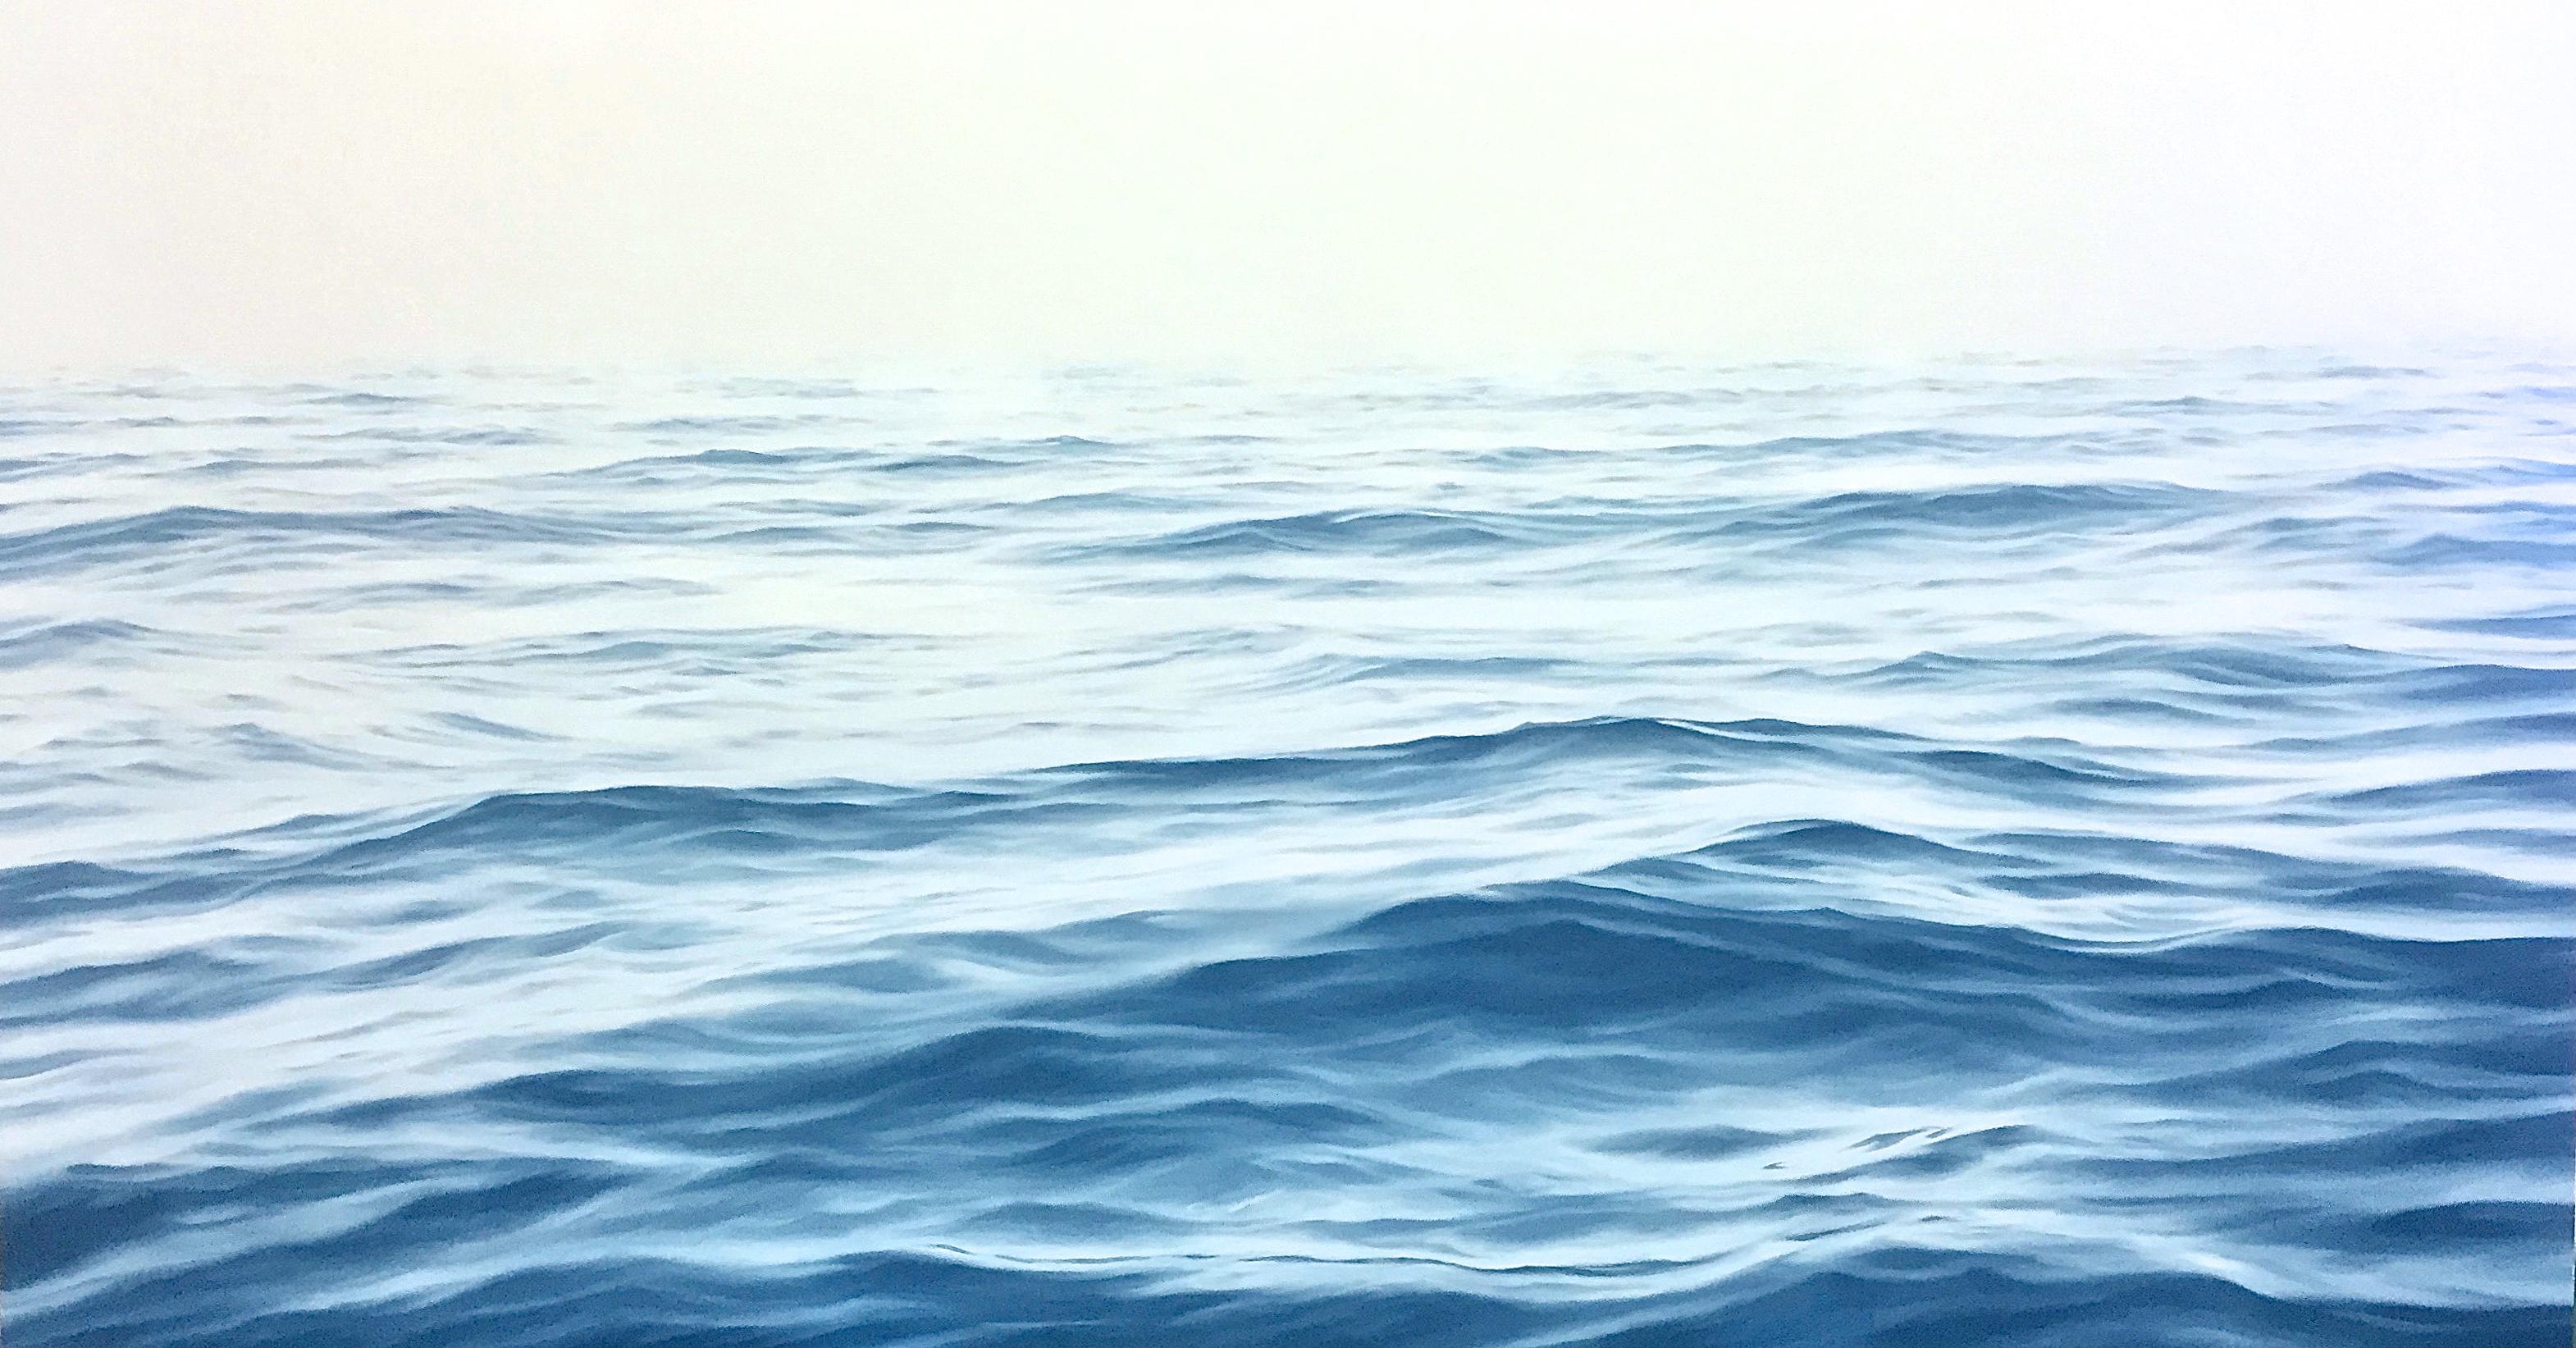 Chris Armstrong Landscape Painting - "Ananda 2, Highly Realistic Contemporary Water Ocean Painting in Blue and White"